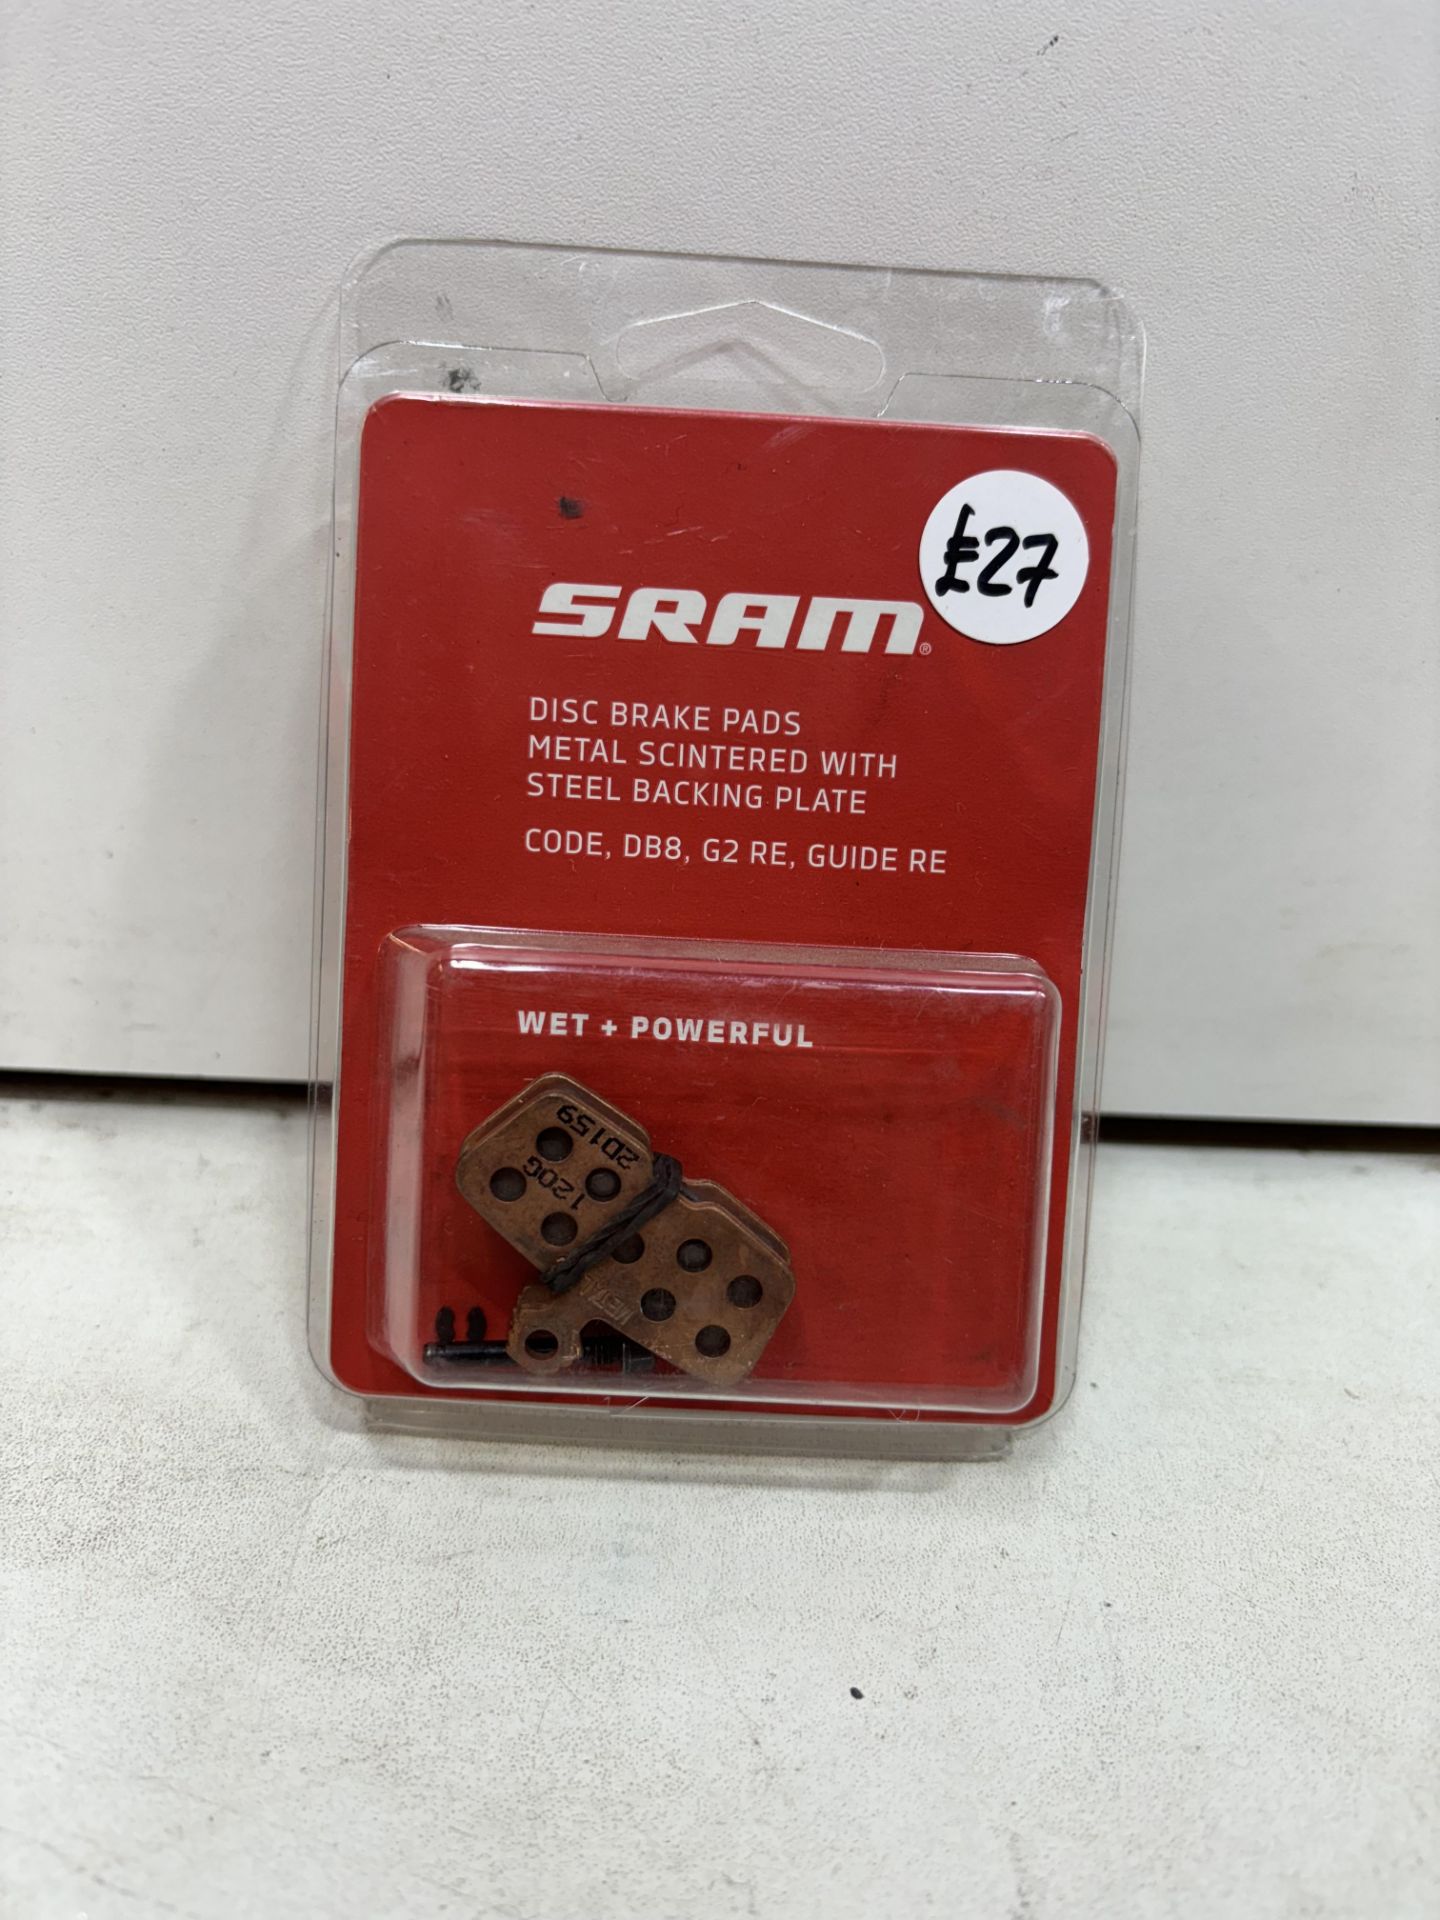 4 x SRAM Disc Brake Pads, Metal Scintered With Steel Backing Plate - Image 2 of 2